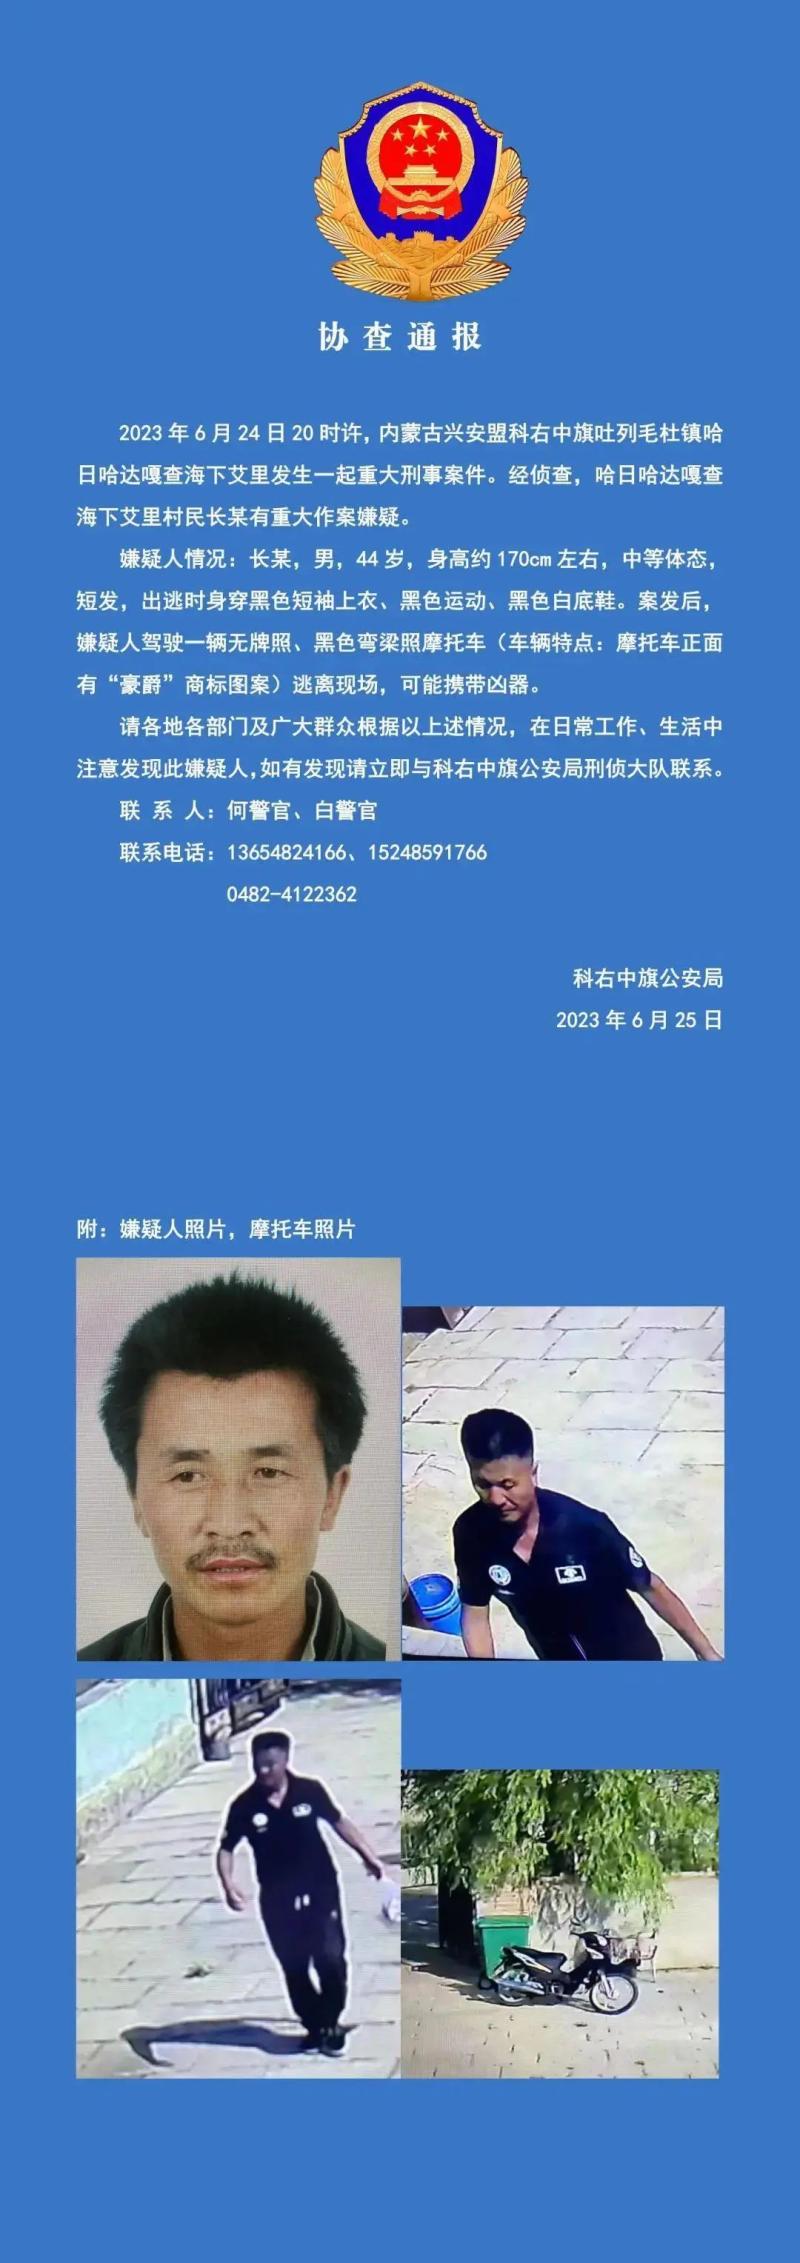 May carry a murder weapon, a major criminal case has occurred in Inner Mongolia! Police report: Suspect on the run from Mengke | Zhongqi | Police